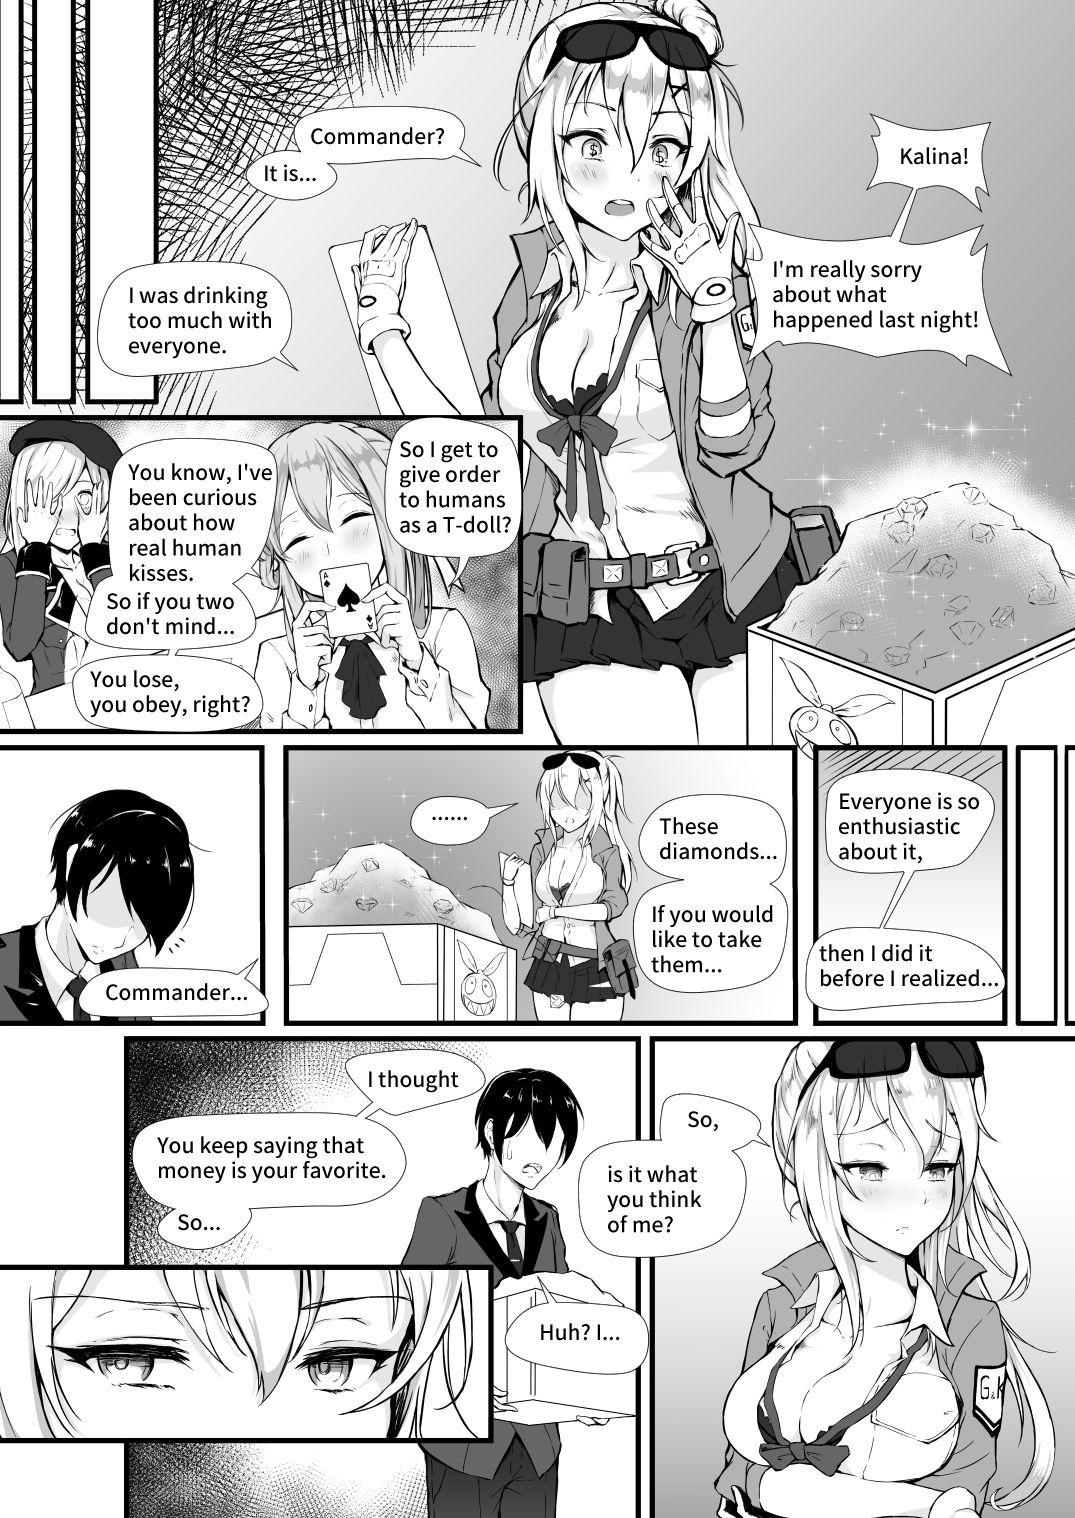 Spreading How Many Diamonds a Kiss Worth? - Girls frontline Jeans - Page 5